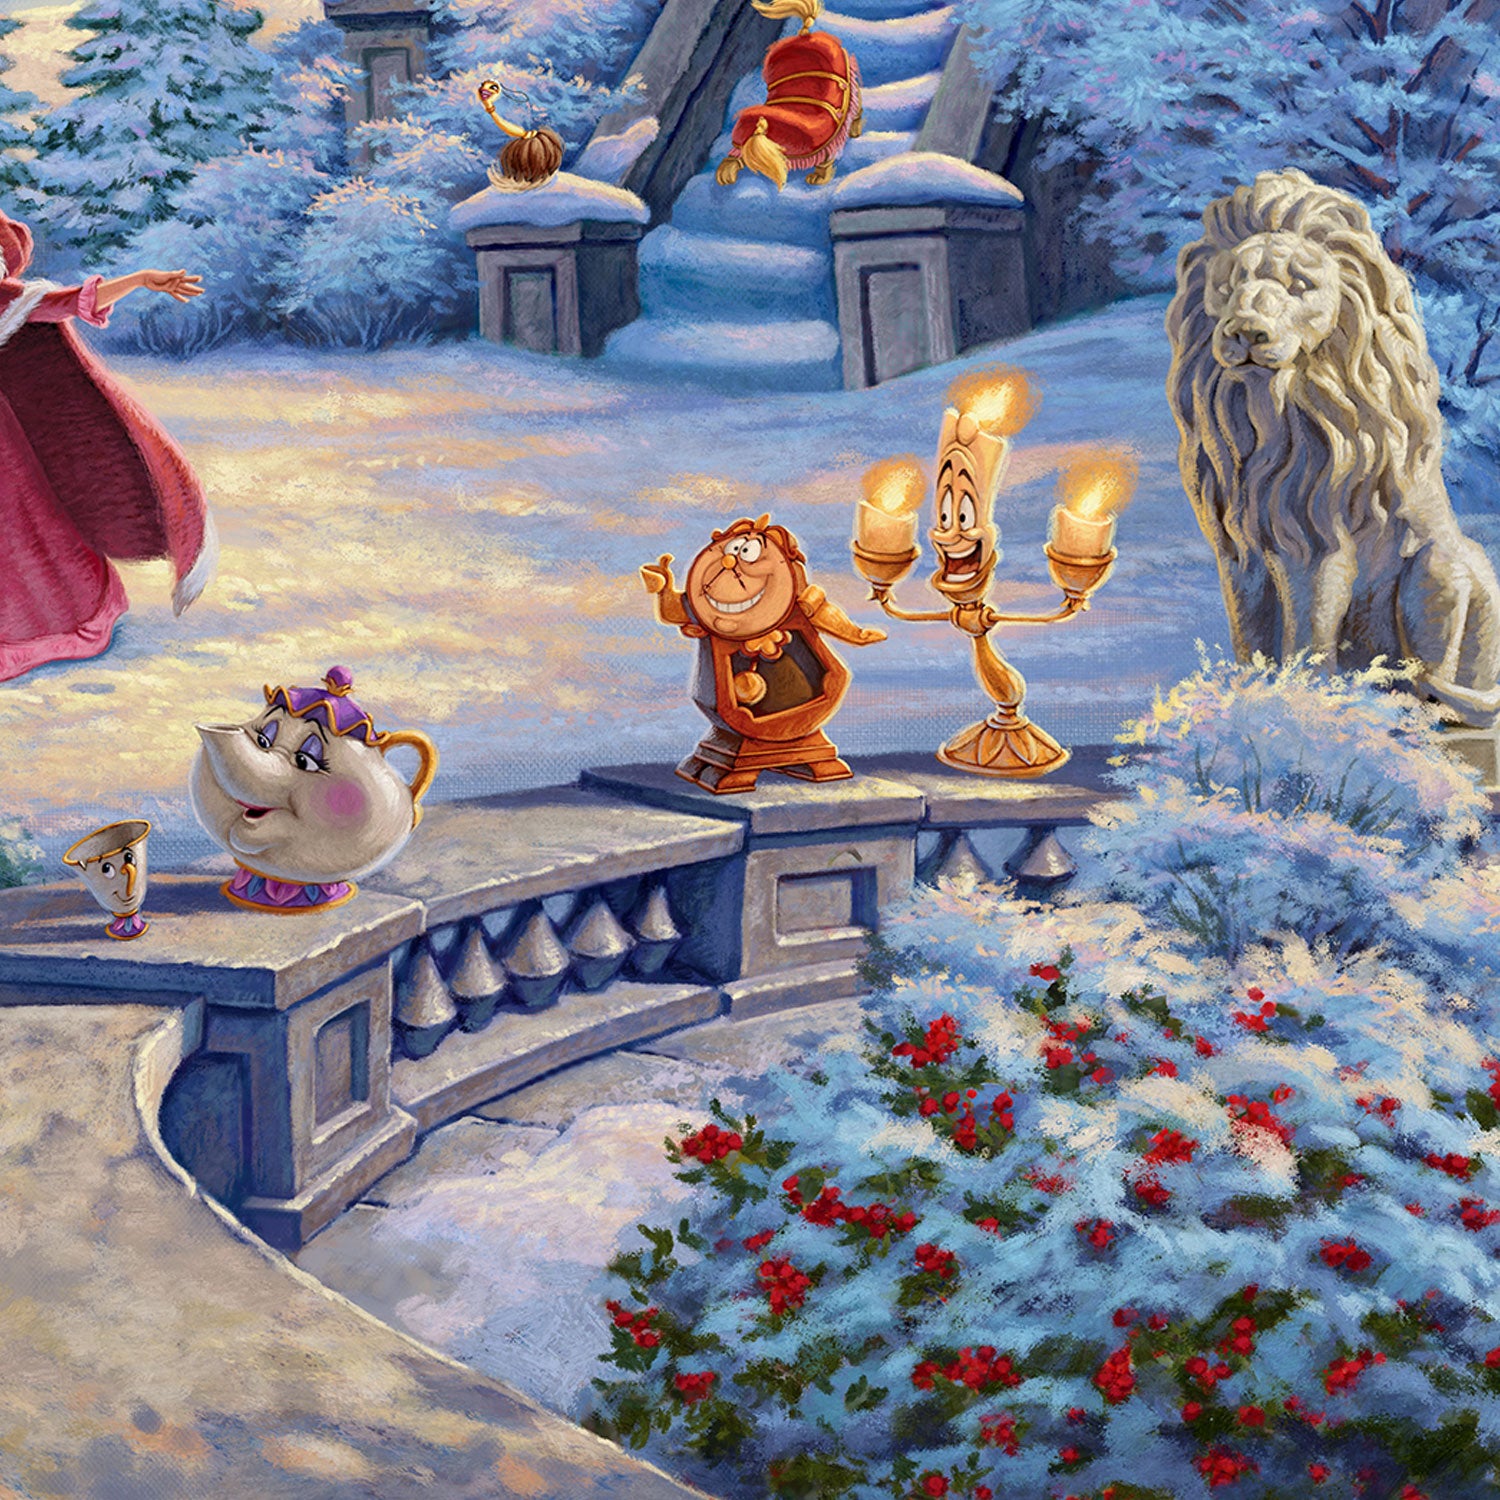 Thomas Kinkade Studios "Beauty and the Beast’s Winter Enchantment" Limited Edition Canvas Giclee